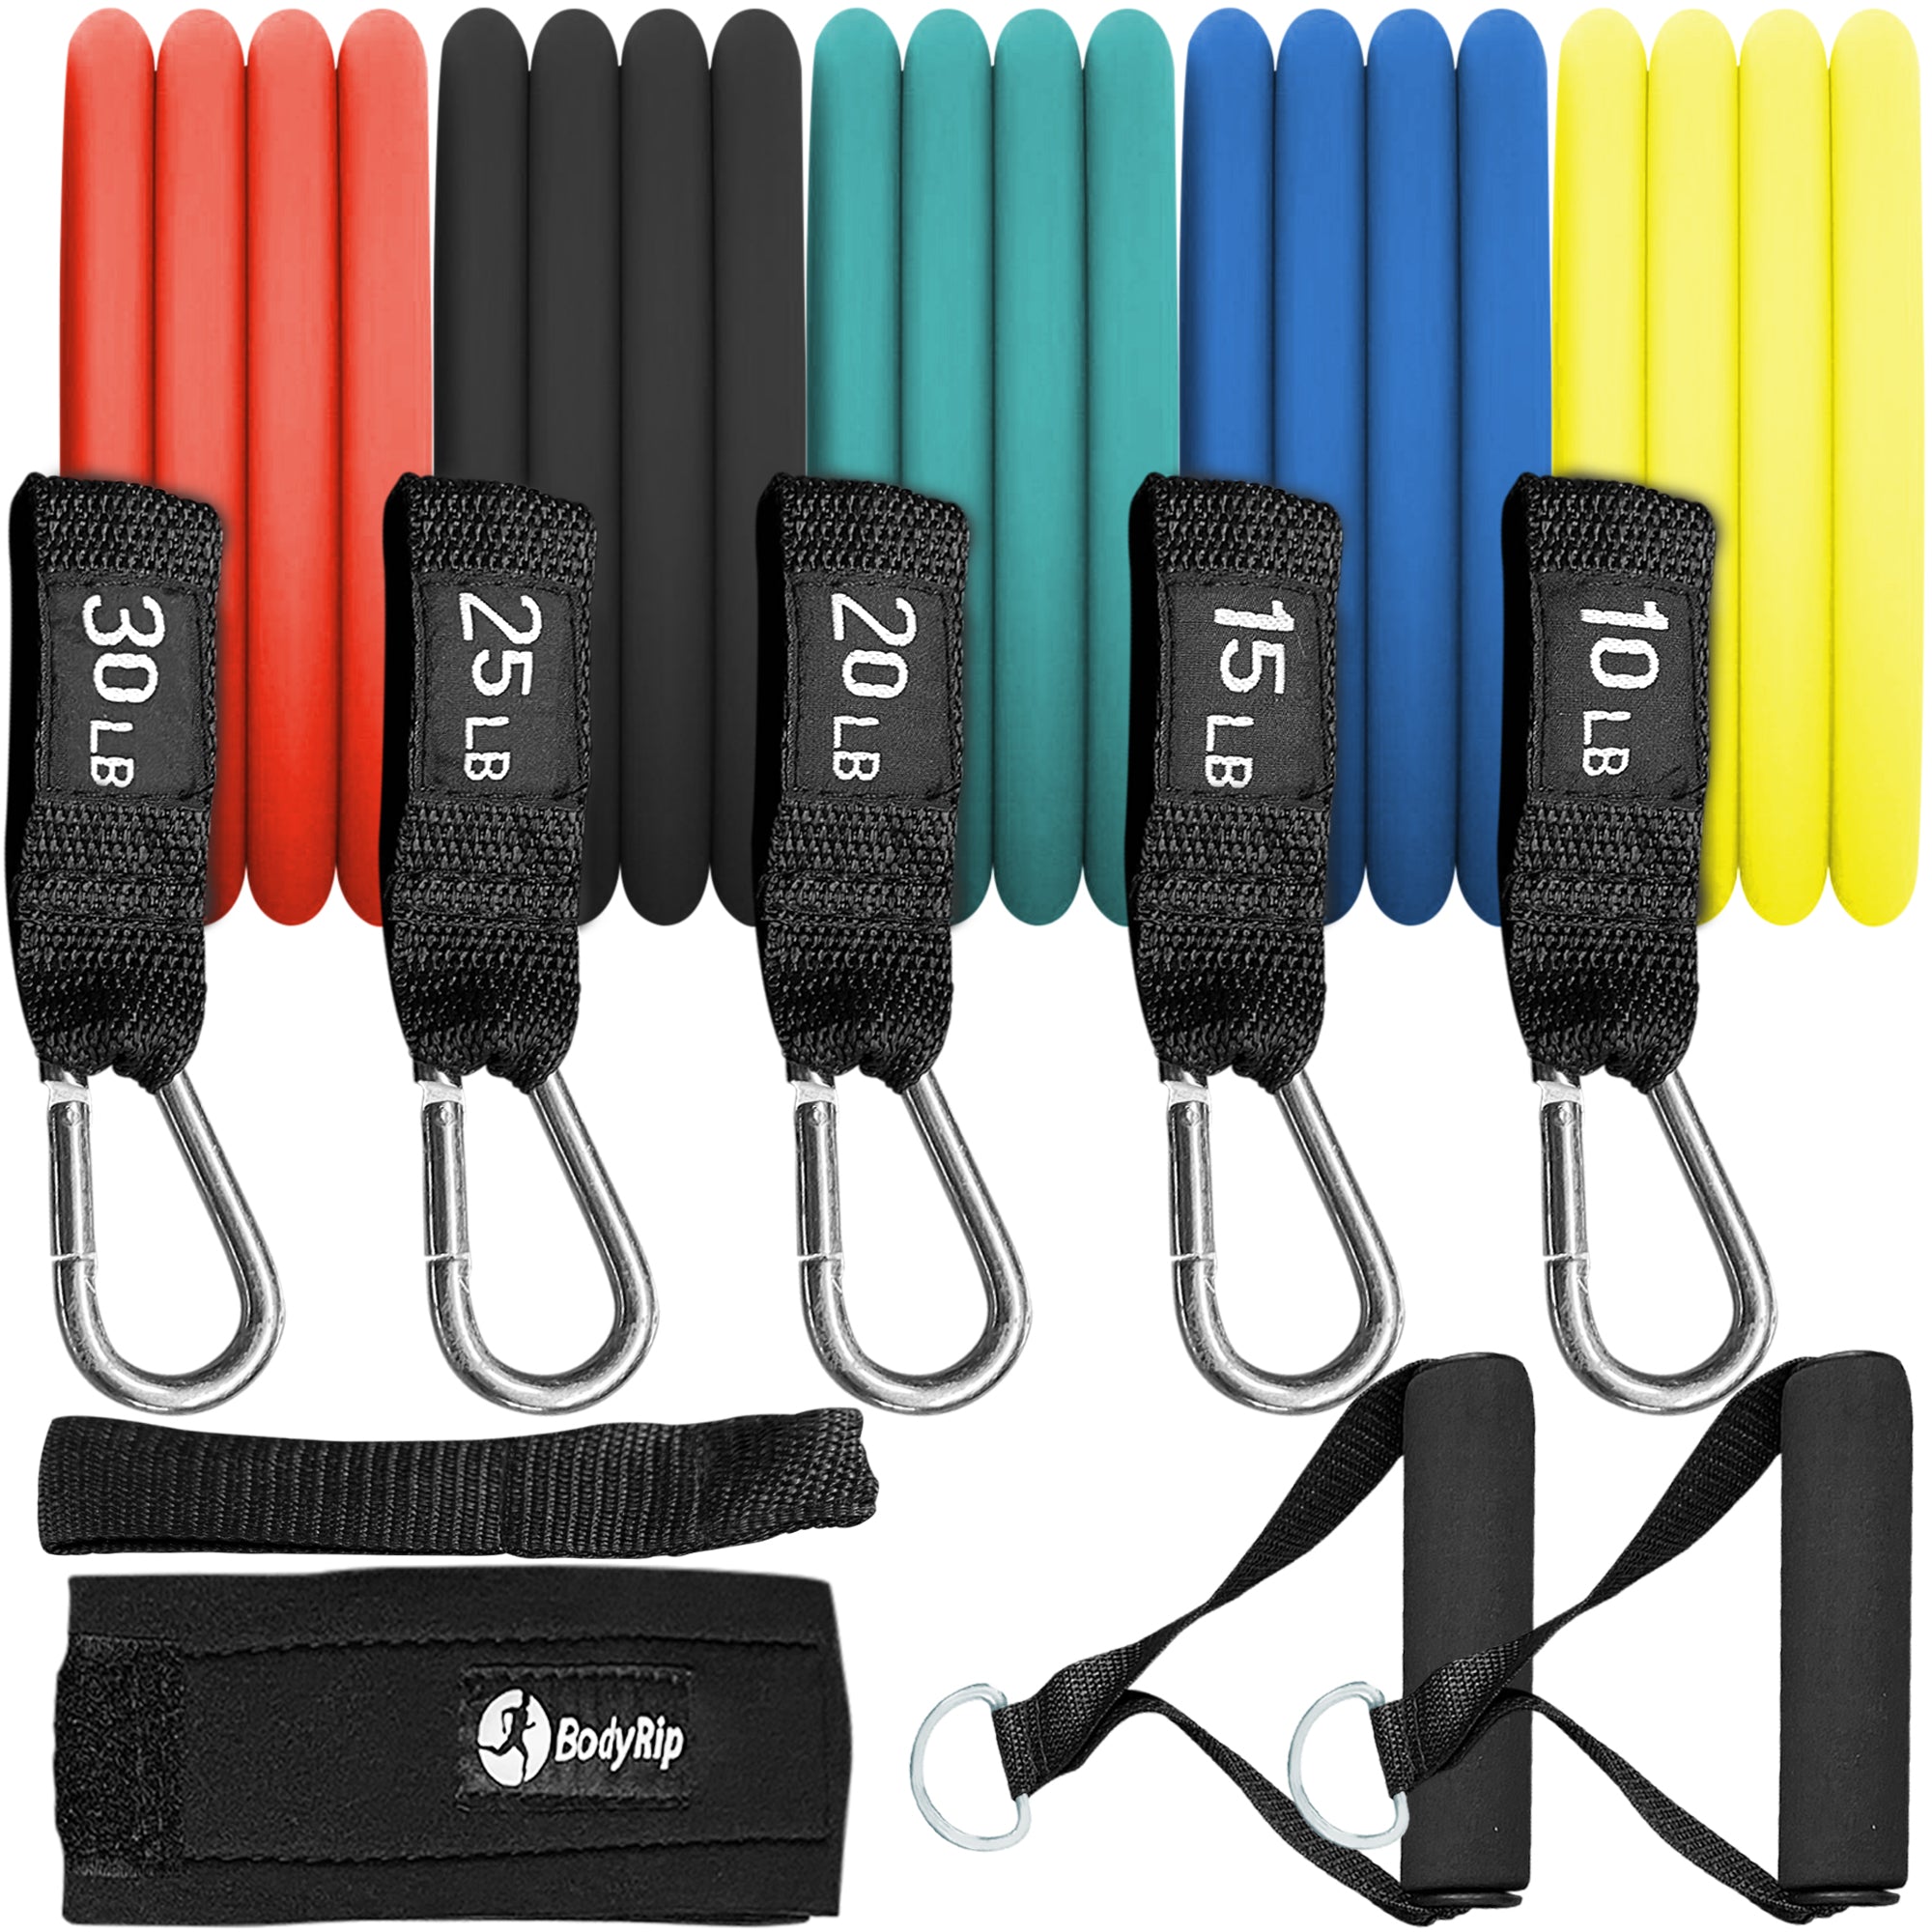 Resistance Exercise Band Set